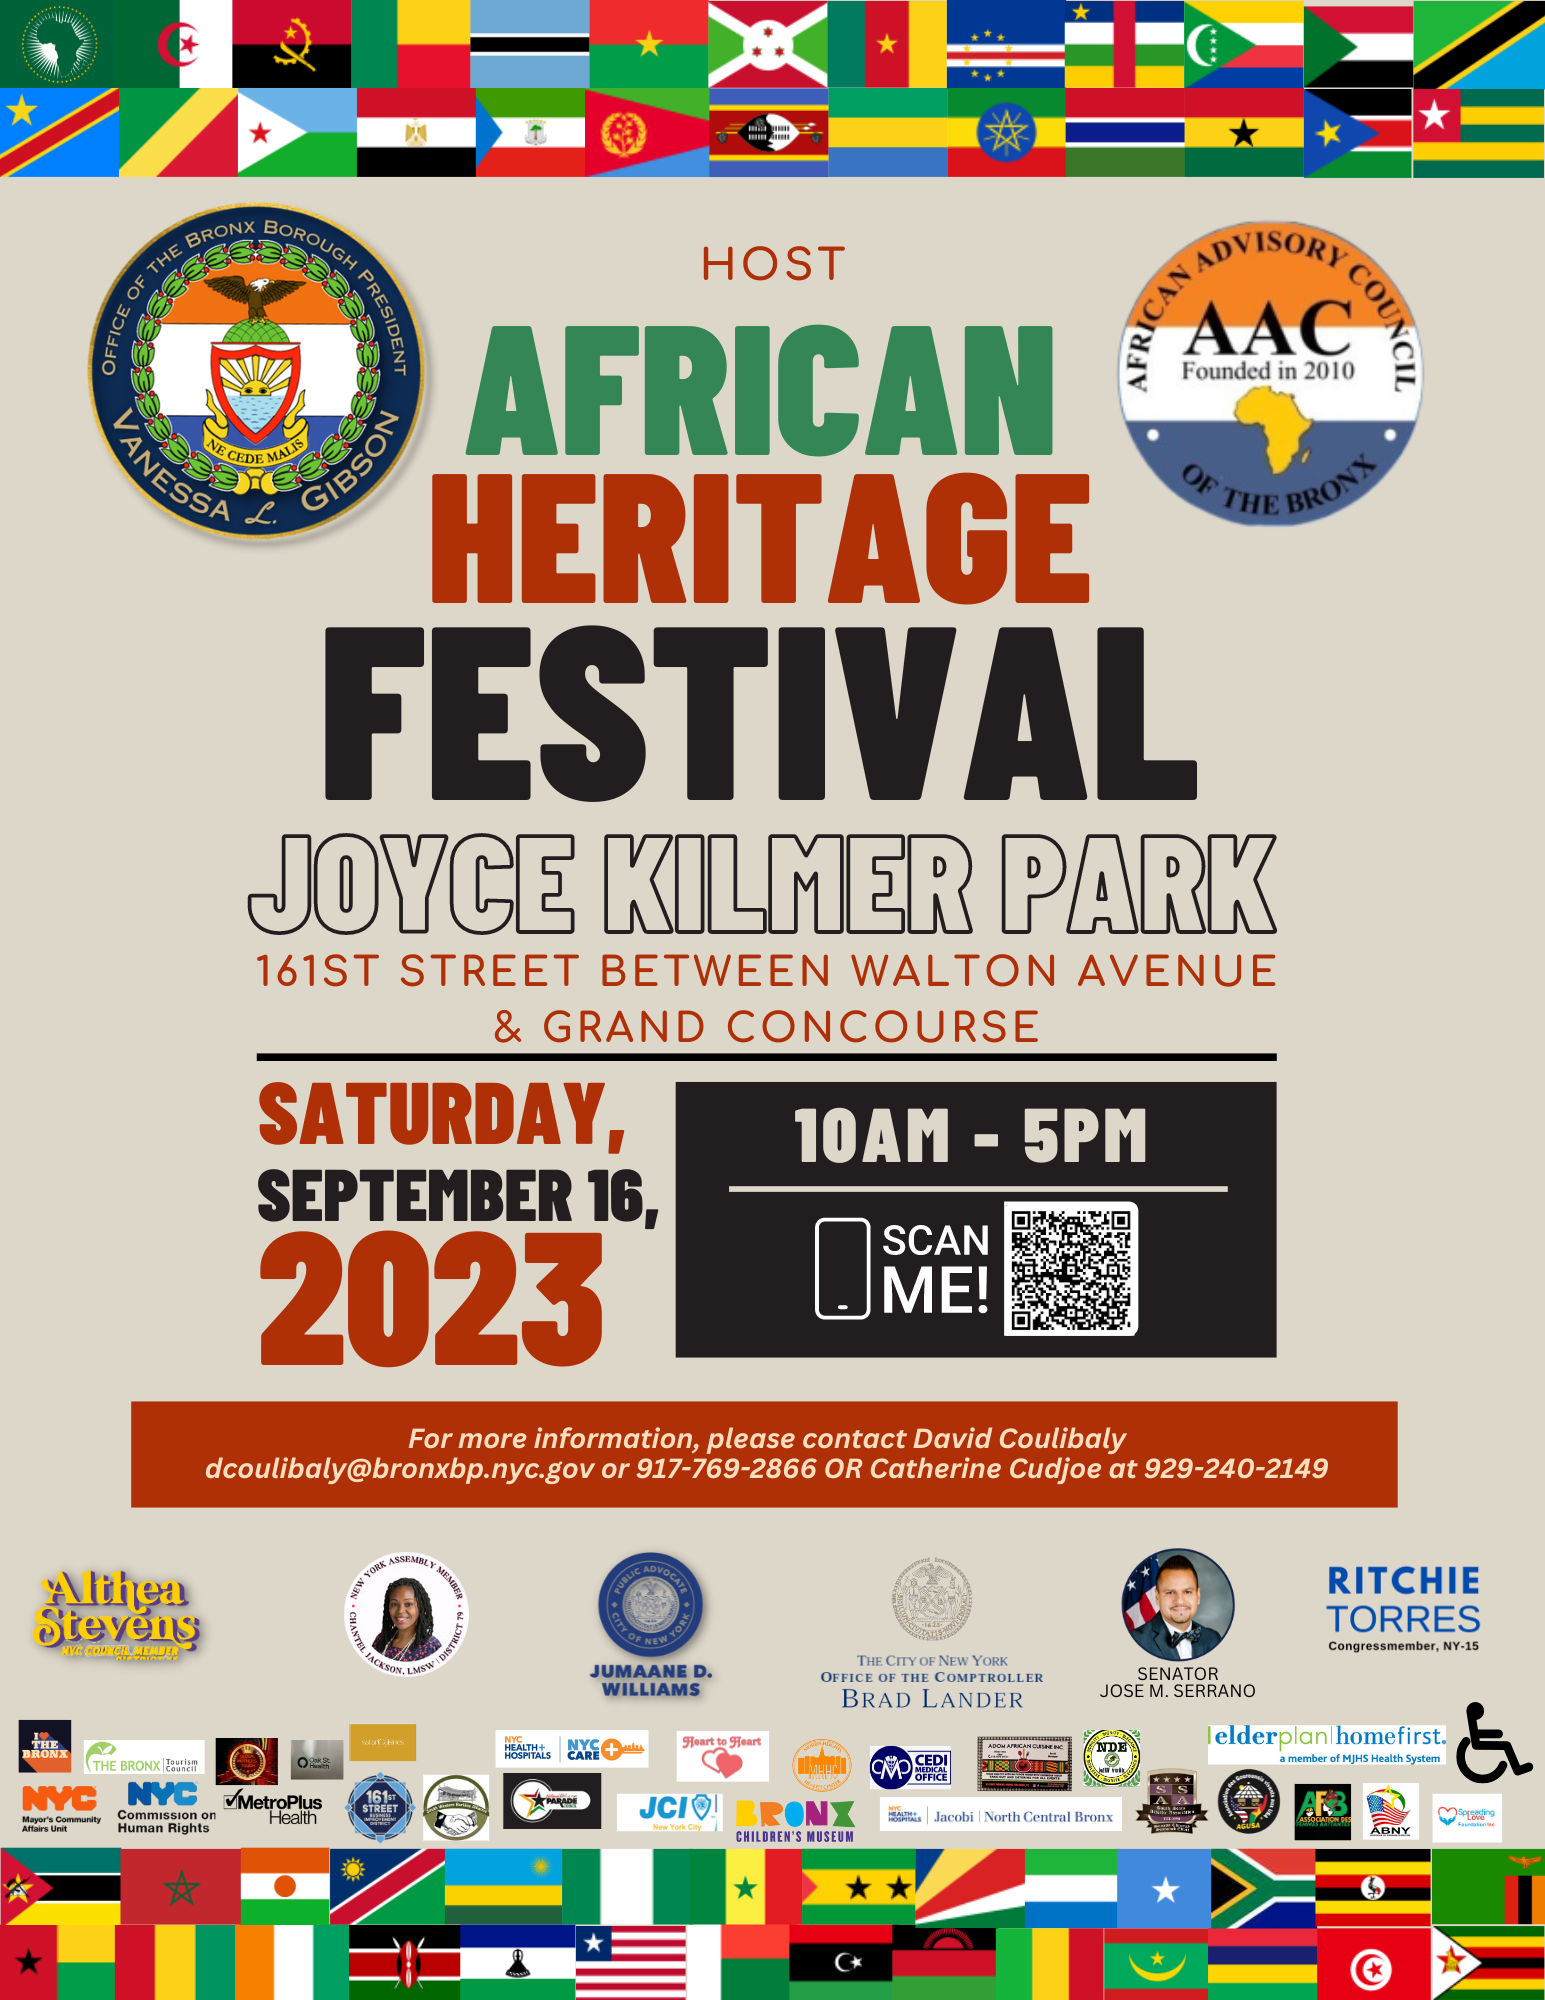 A flyer for the African Heritage Festival in Joyce Kilmer Park on September 16, 2023, from 10 AM to 5 PM.